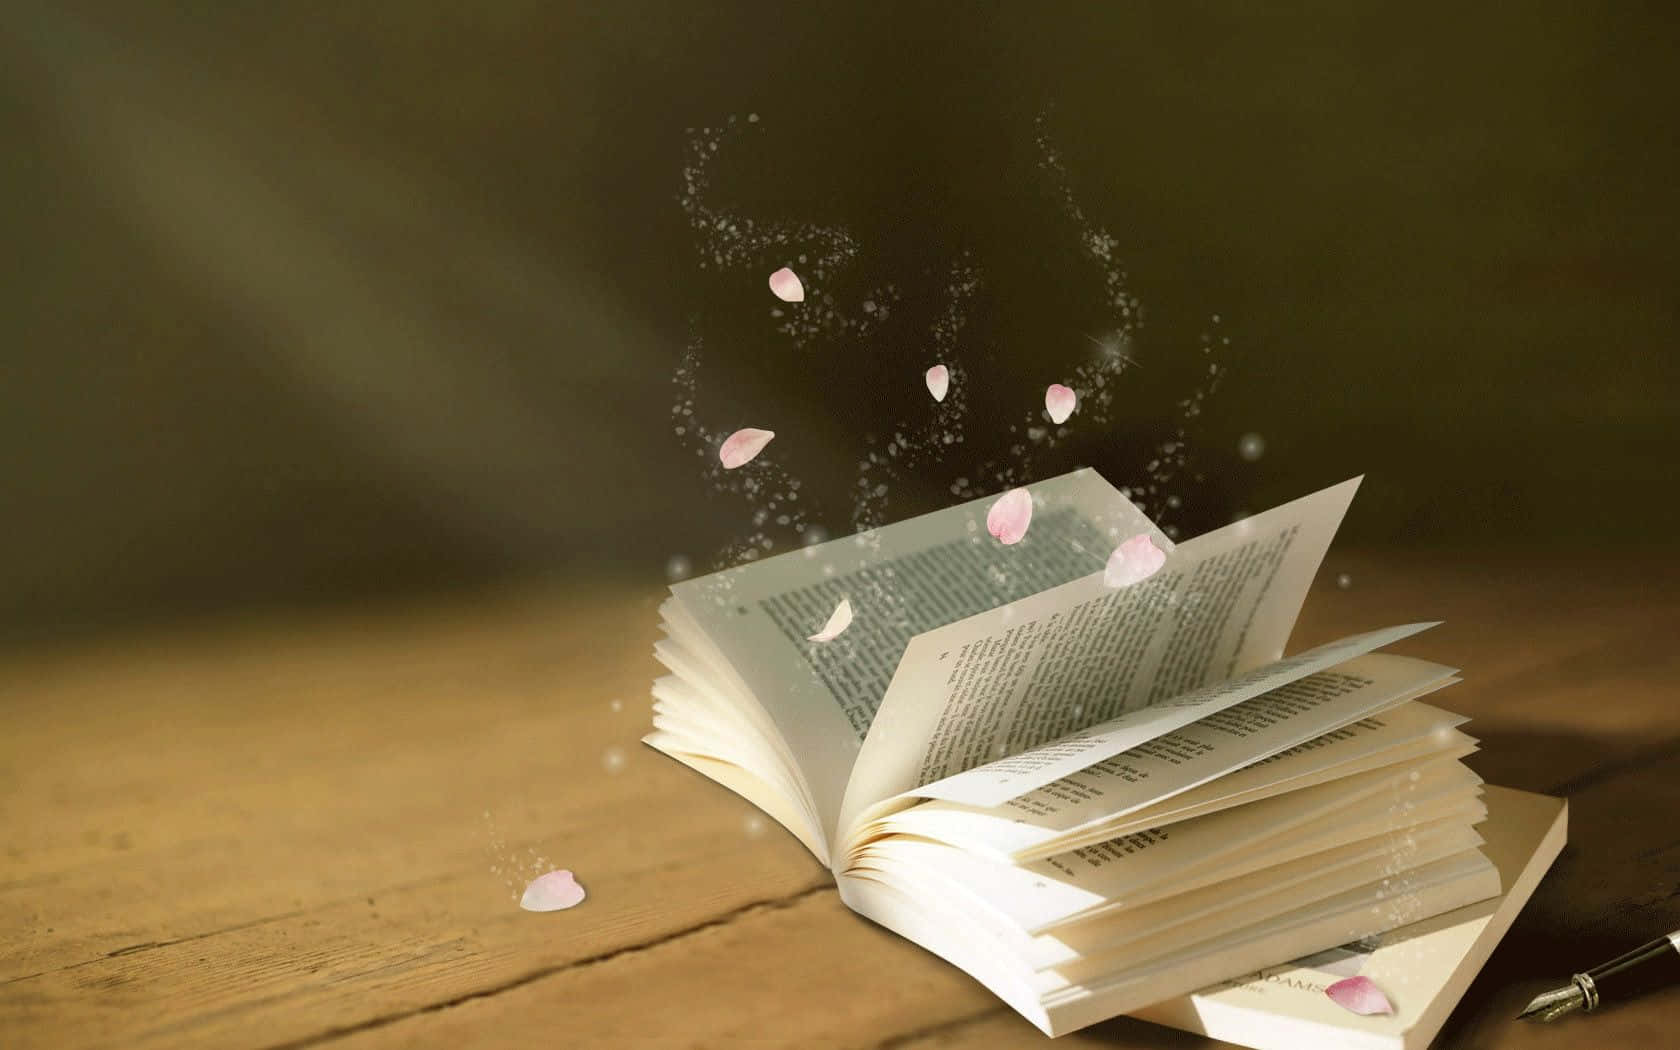 A Book With Pink Petals Flying Out Of It